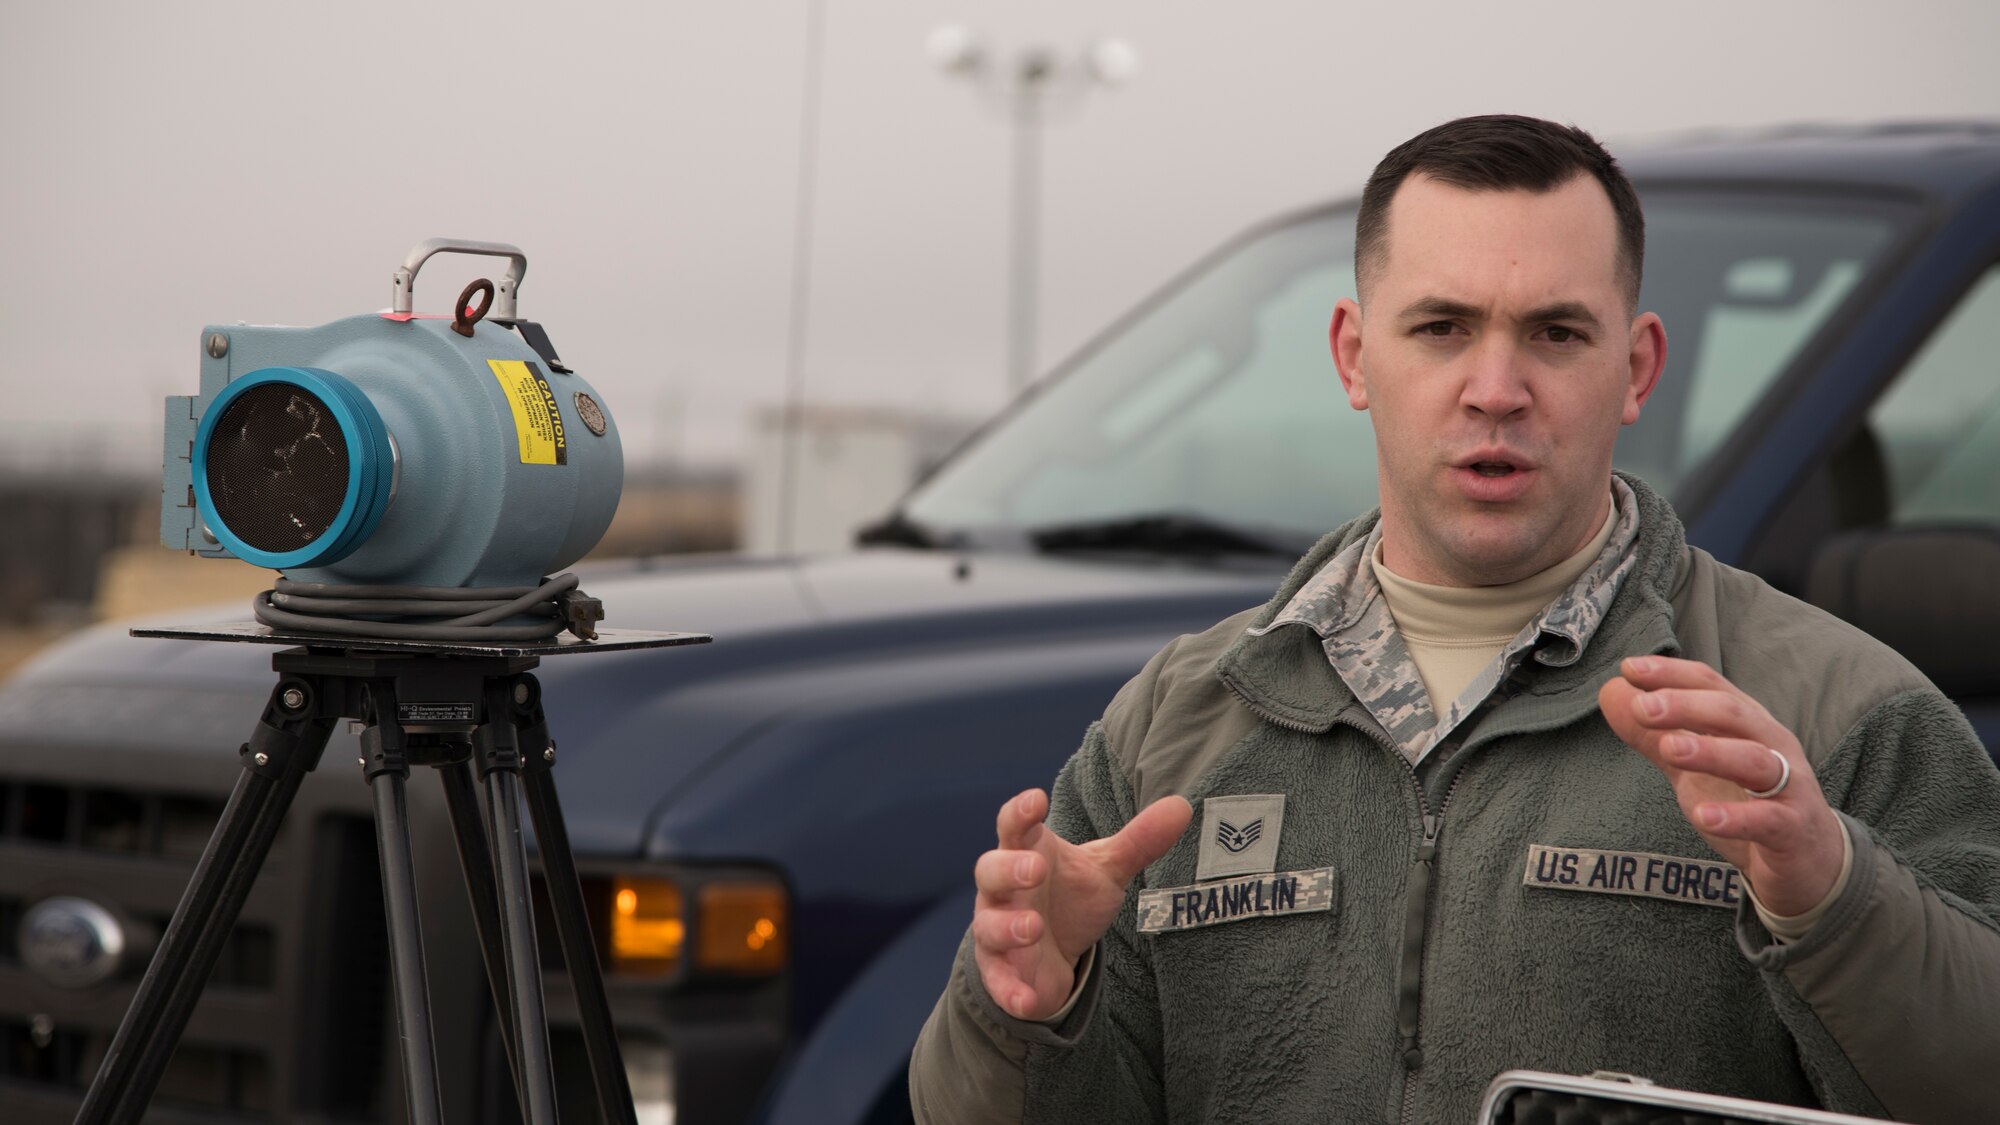 Staff Sgt. Micah Franklin, 92nd Aerospace Medicine Squadron Bio-environmental Engineering craftsman, briefs members of the Spokane Local Emergency Planning Committee on how Team Fairchild hazardous material response teams could deploy a  Radeco high volume air sampler at Fairchild Air Force Base, Washington, Nov. 7, 2018. Emergency response Airmen function much like their civilian counterparts, but are more specialized to handle the specific challenges an air base may face.  (U.S. Air Force Photo/ Senior Airman Ryan Lackey)